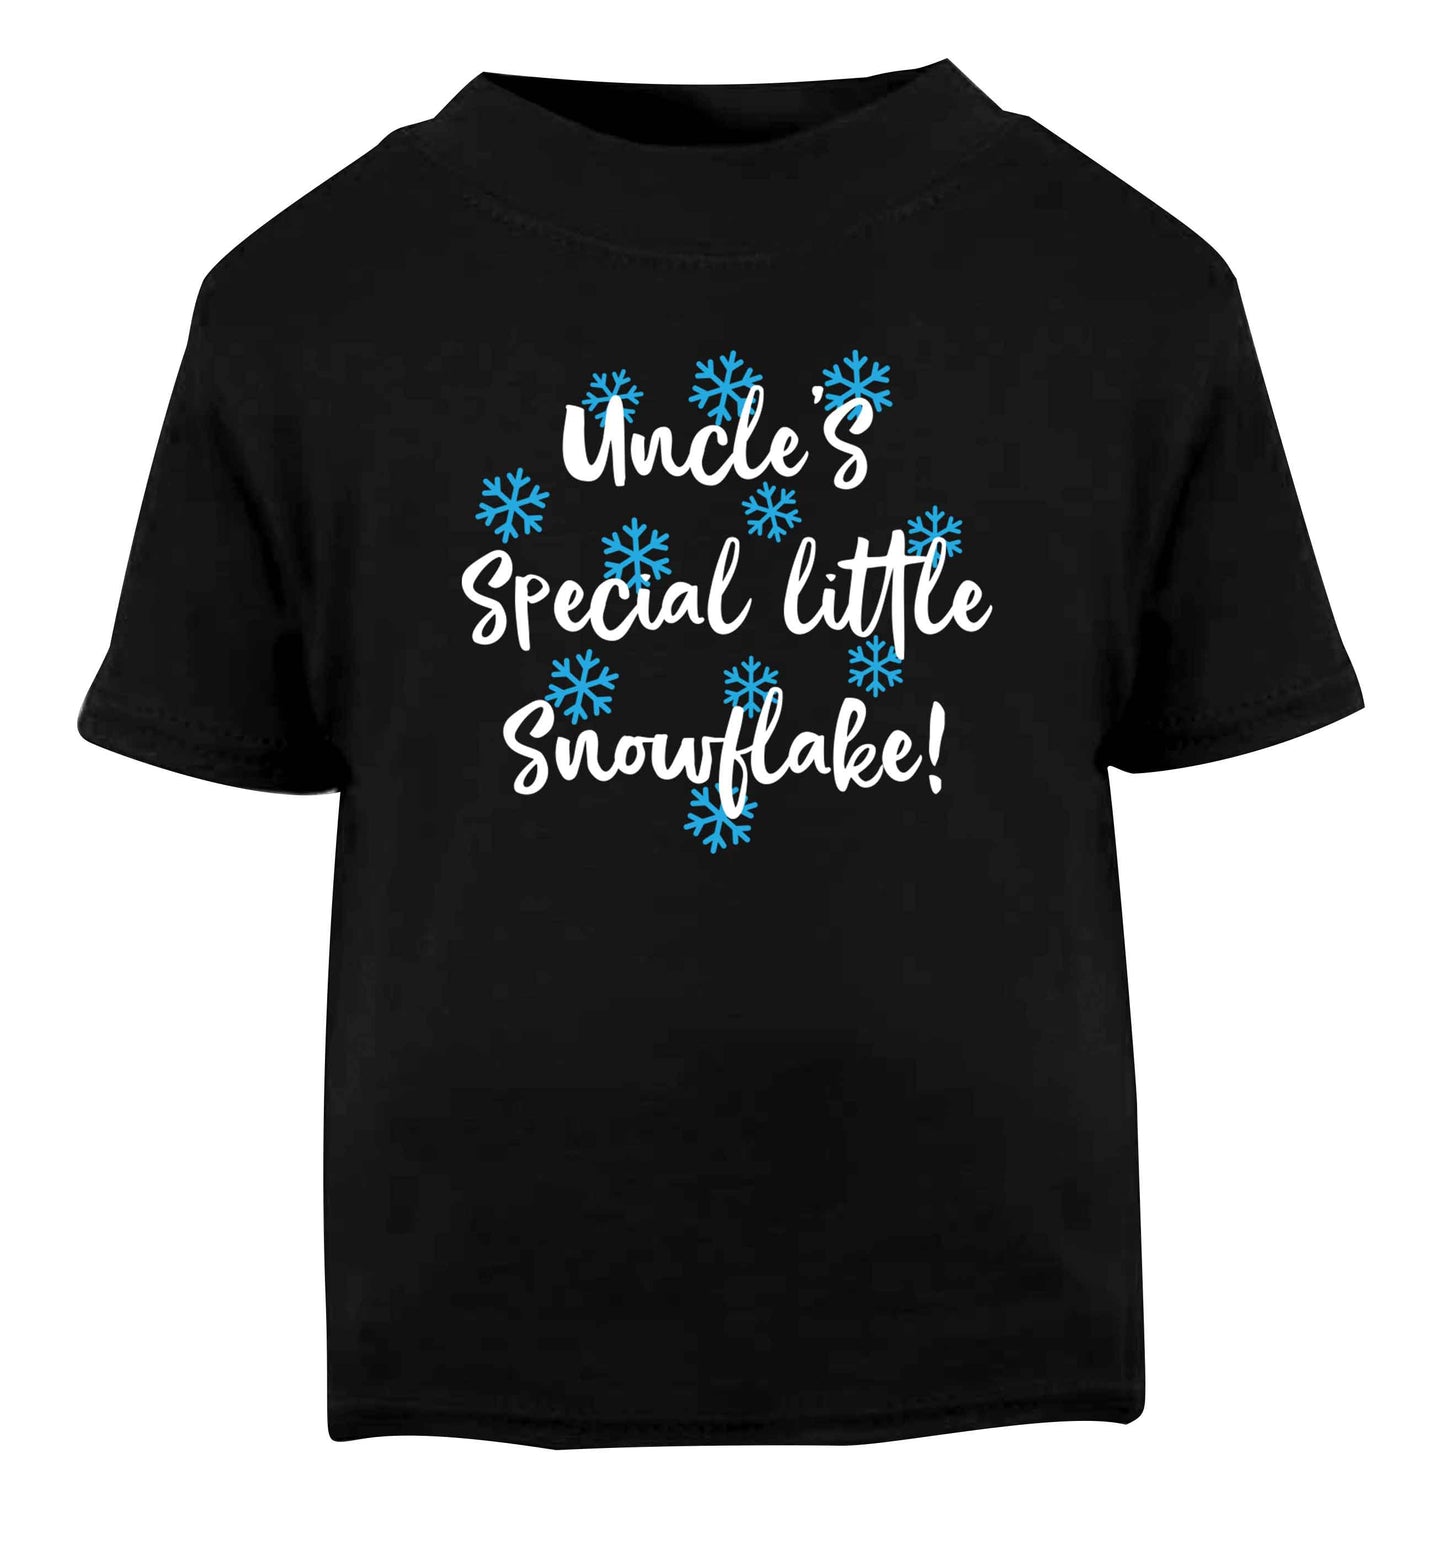 Uncle's special little snowflake Black Baby Toddler Tshirt 2 years